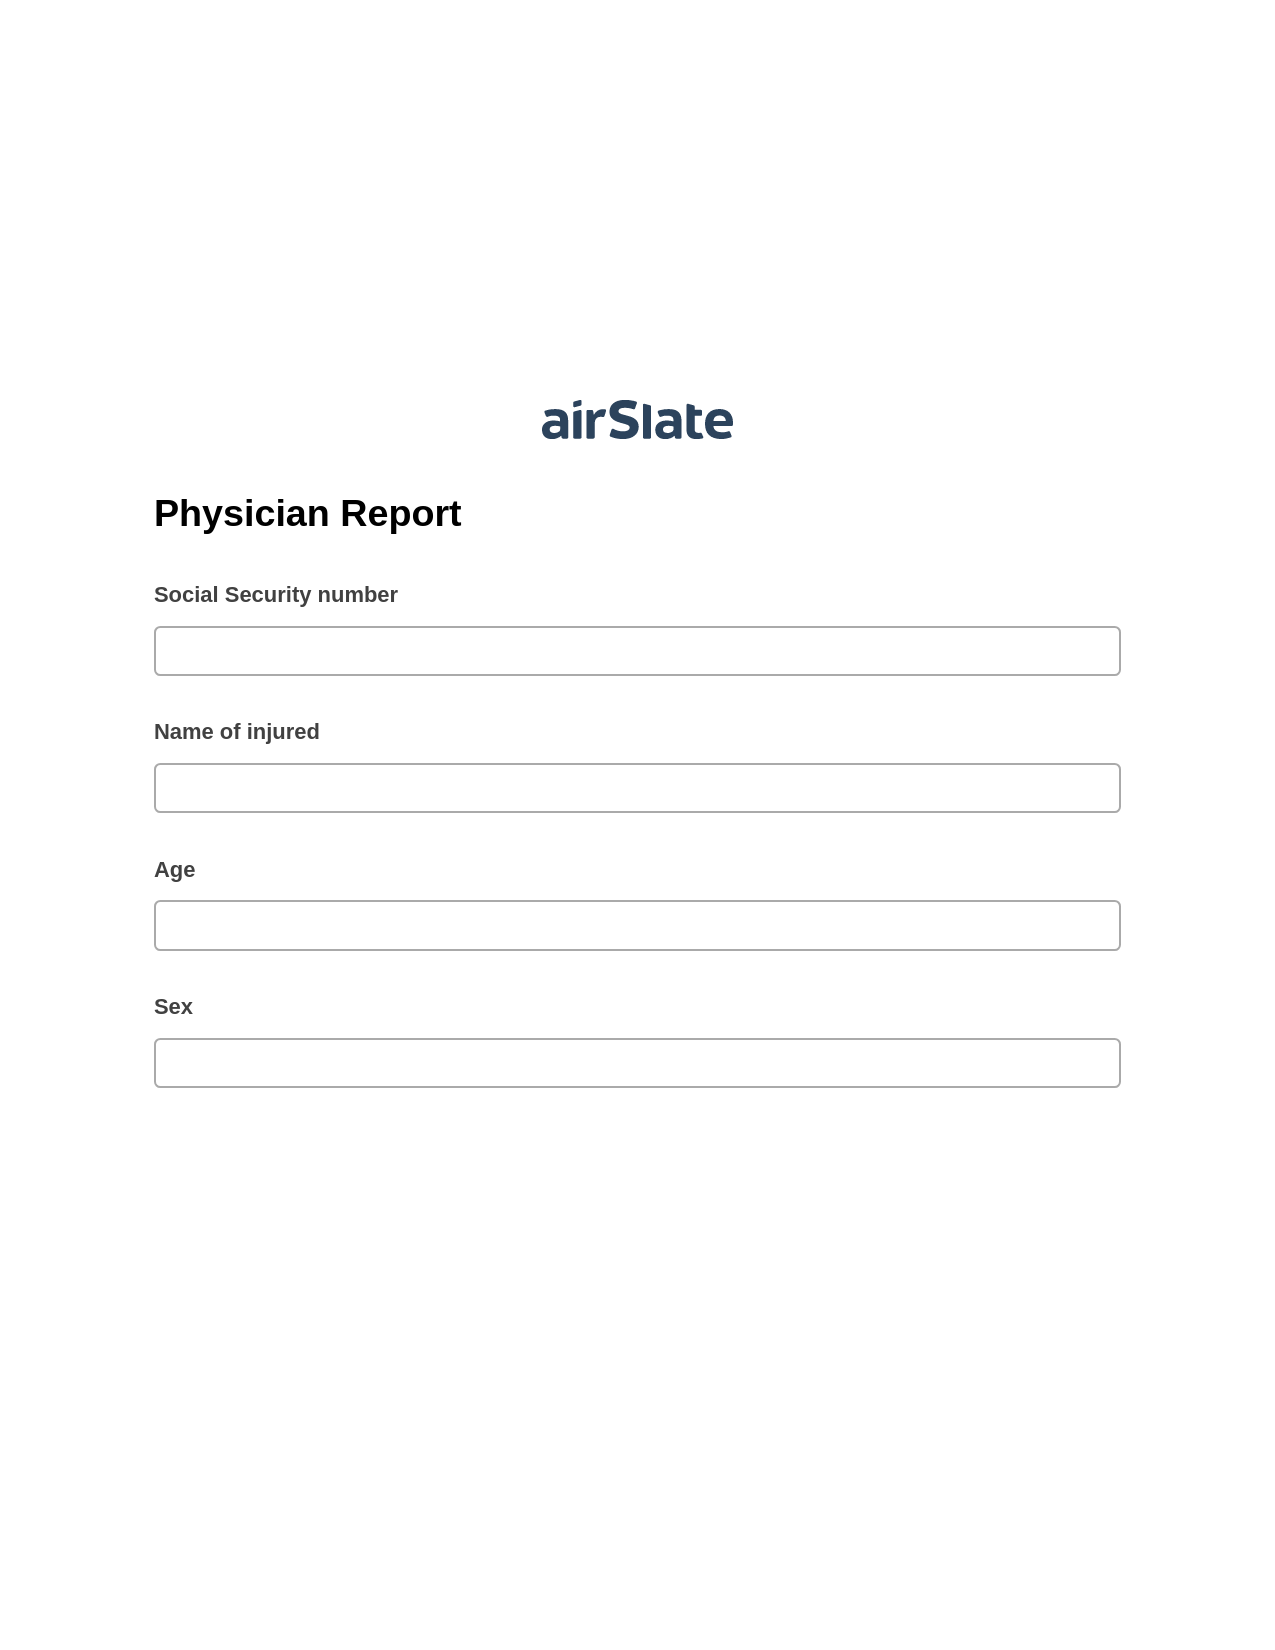 Physician Report Pre-fill Document Bot, Google Sheet Two-Way Binding Bot, Archive to SharePoint Folder Bot